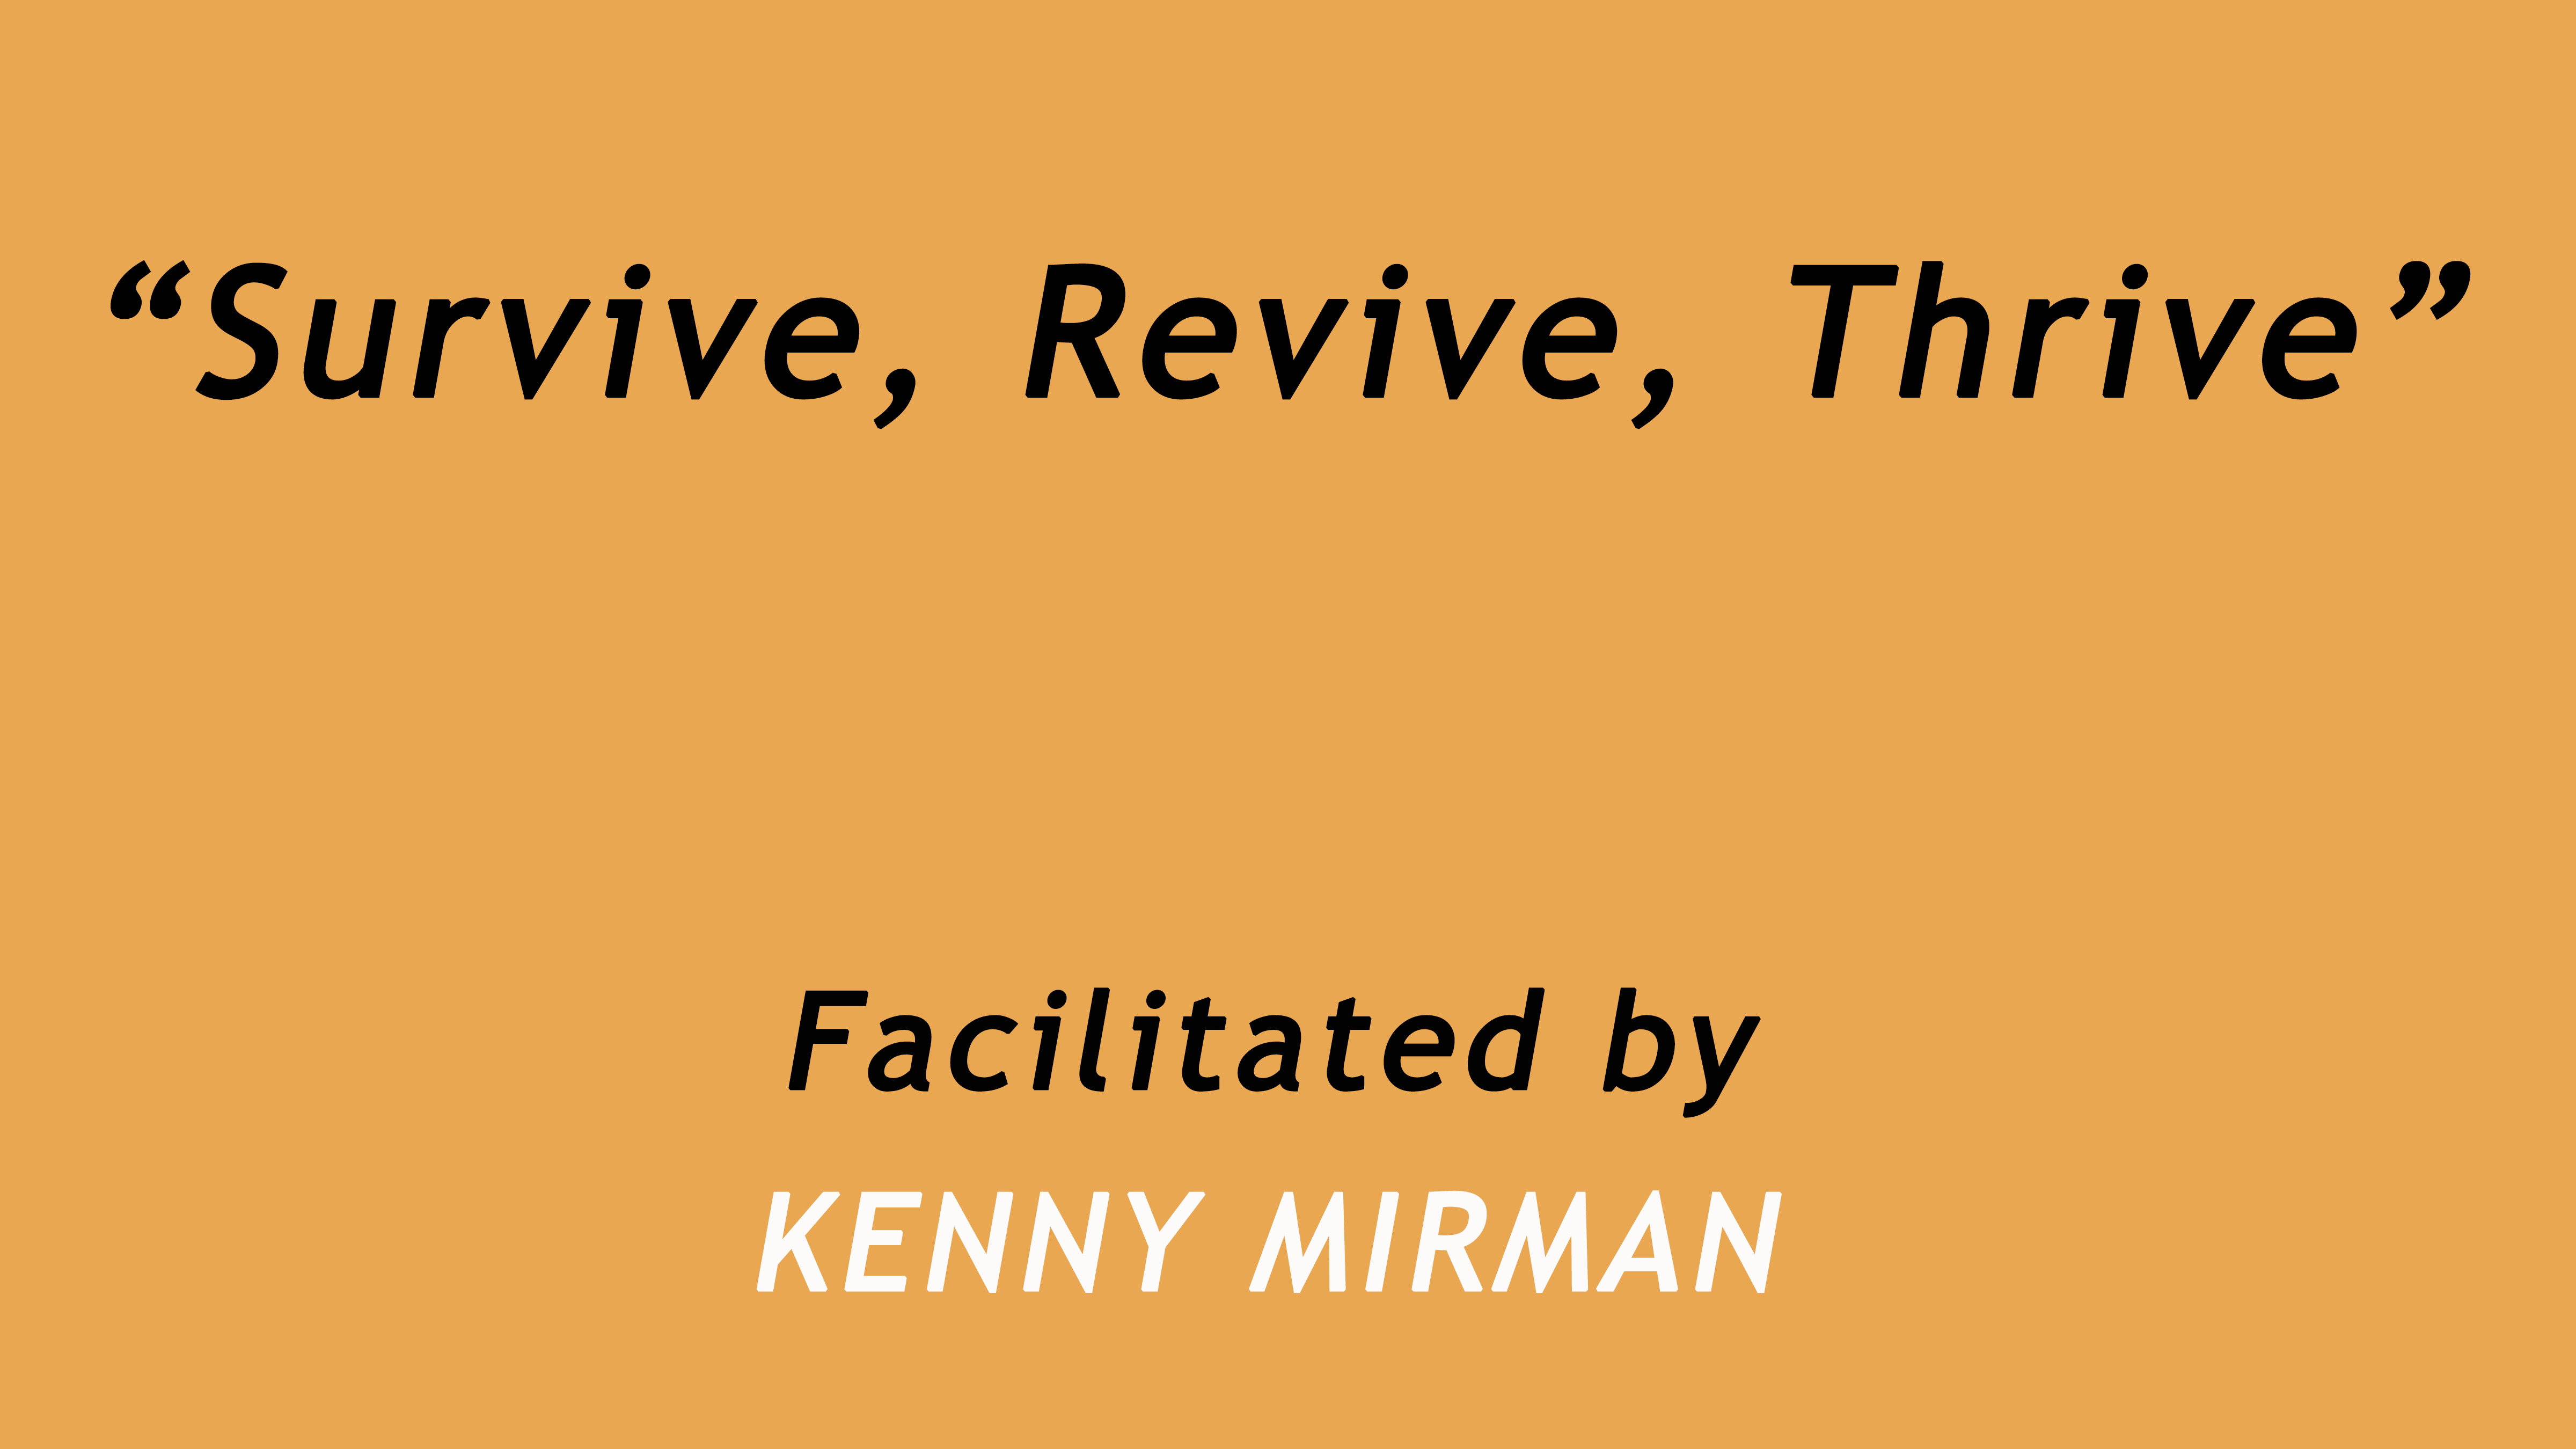 Survive, Revive, Thrive. Facilitated by Kenny Mirman